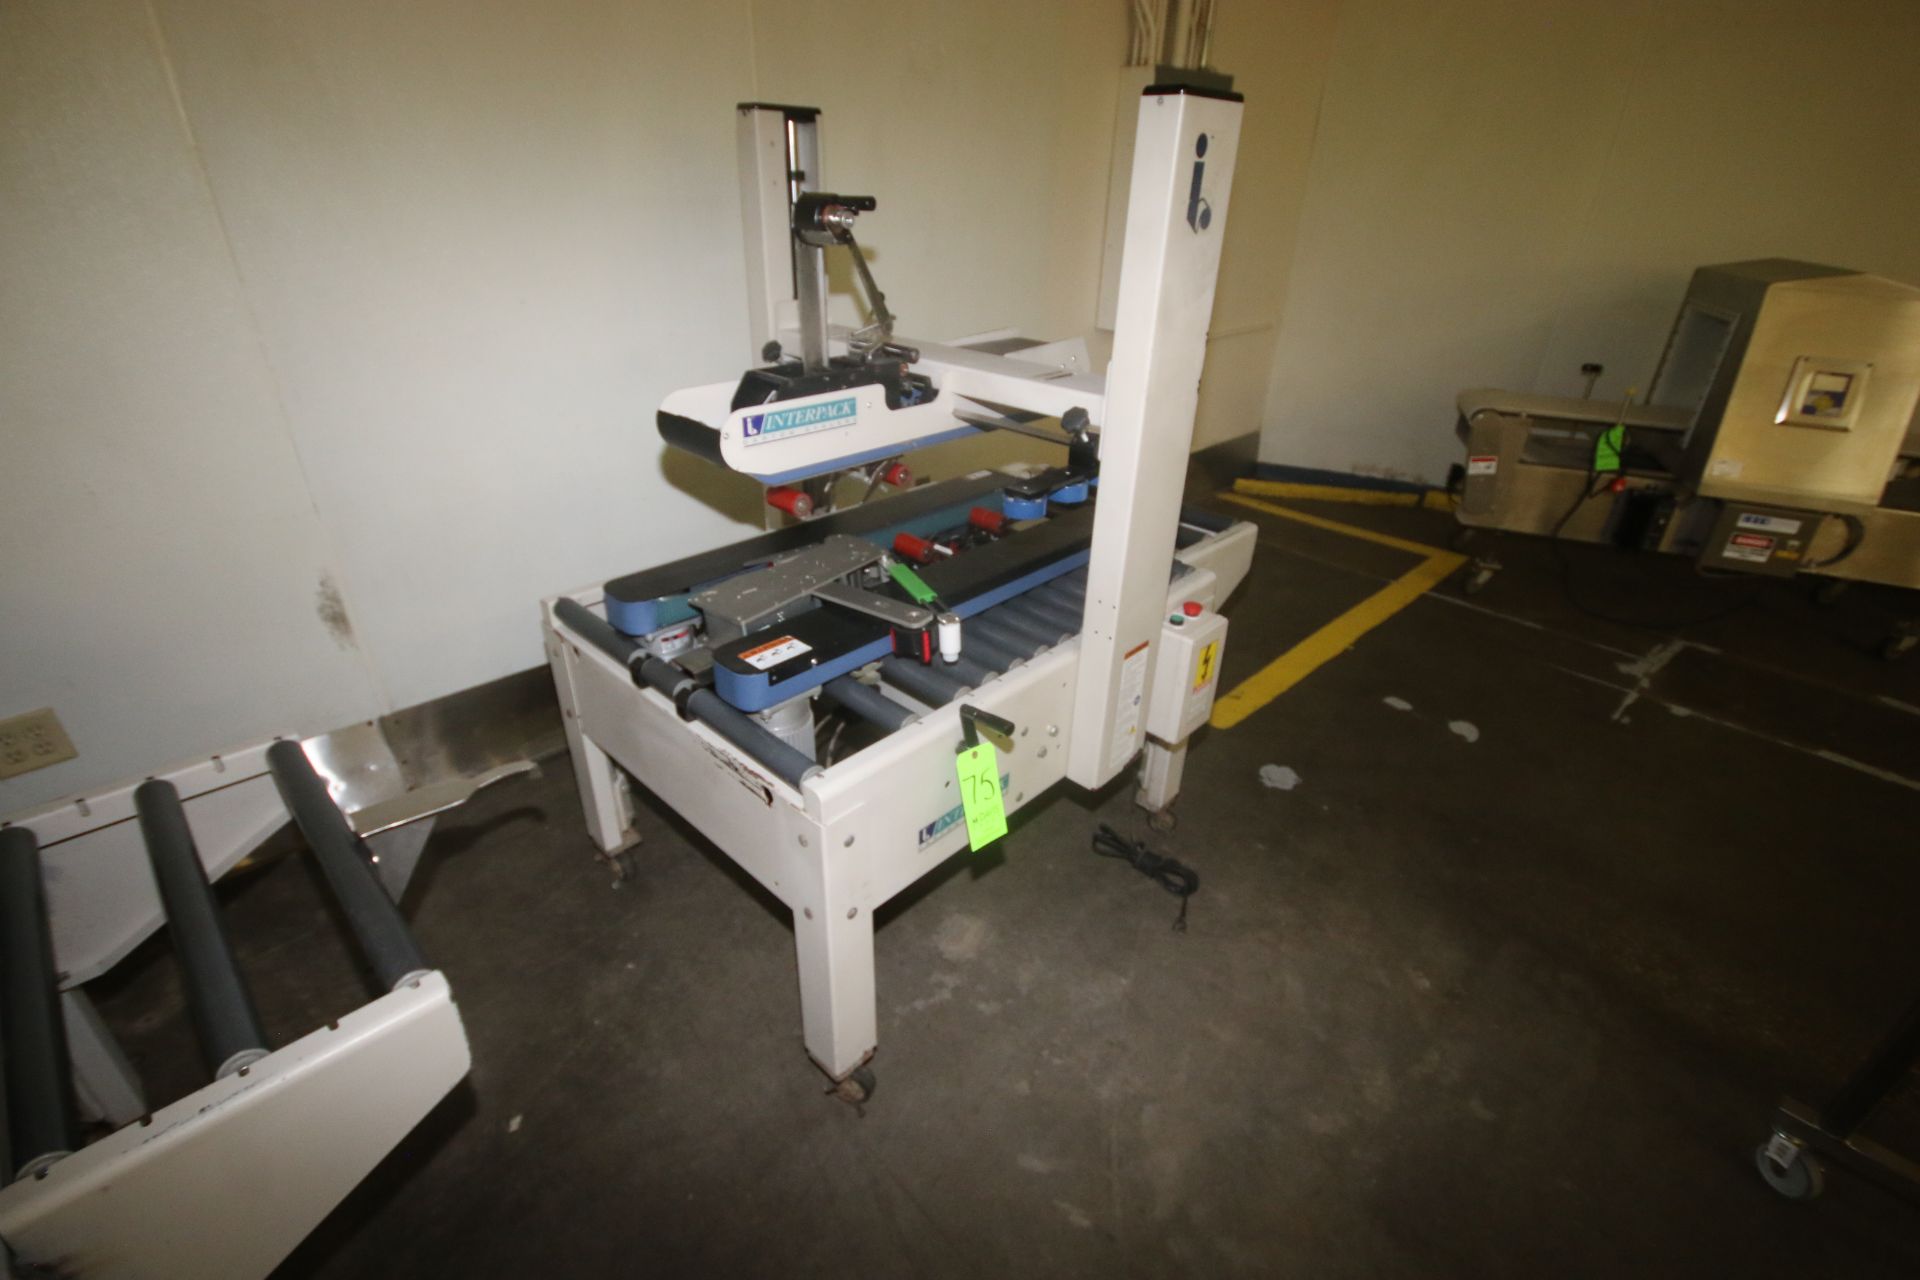 InterPack Top & Bottom Case Sealer, M/N USA 2024-SB/3, 115 Volts, 1 Phase, with Top & Bottom Tape